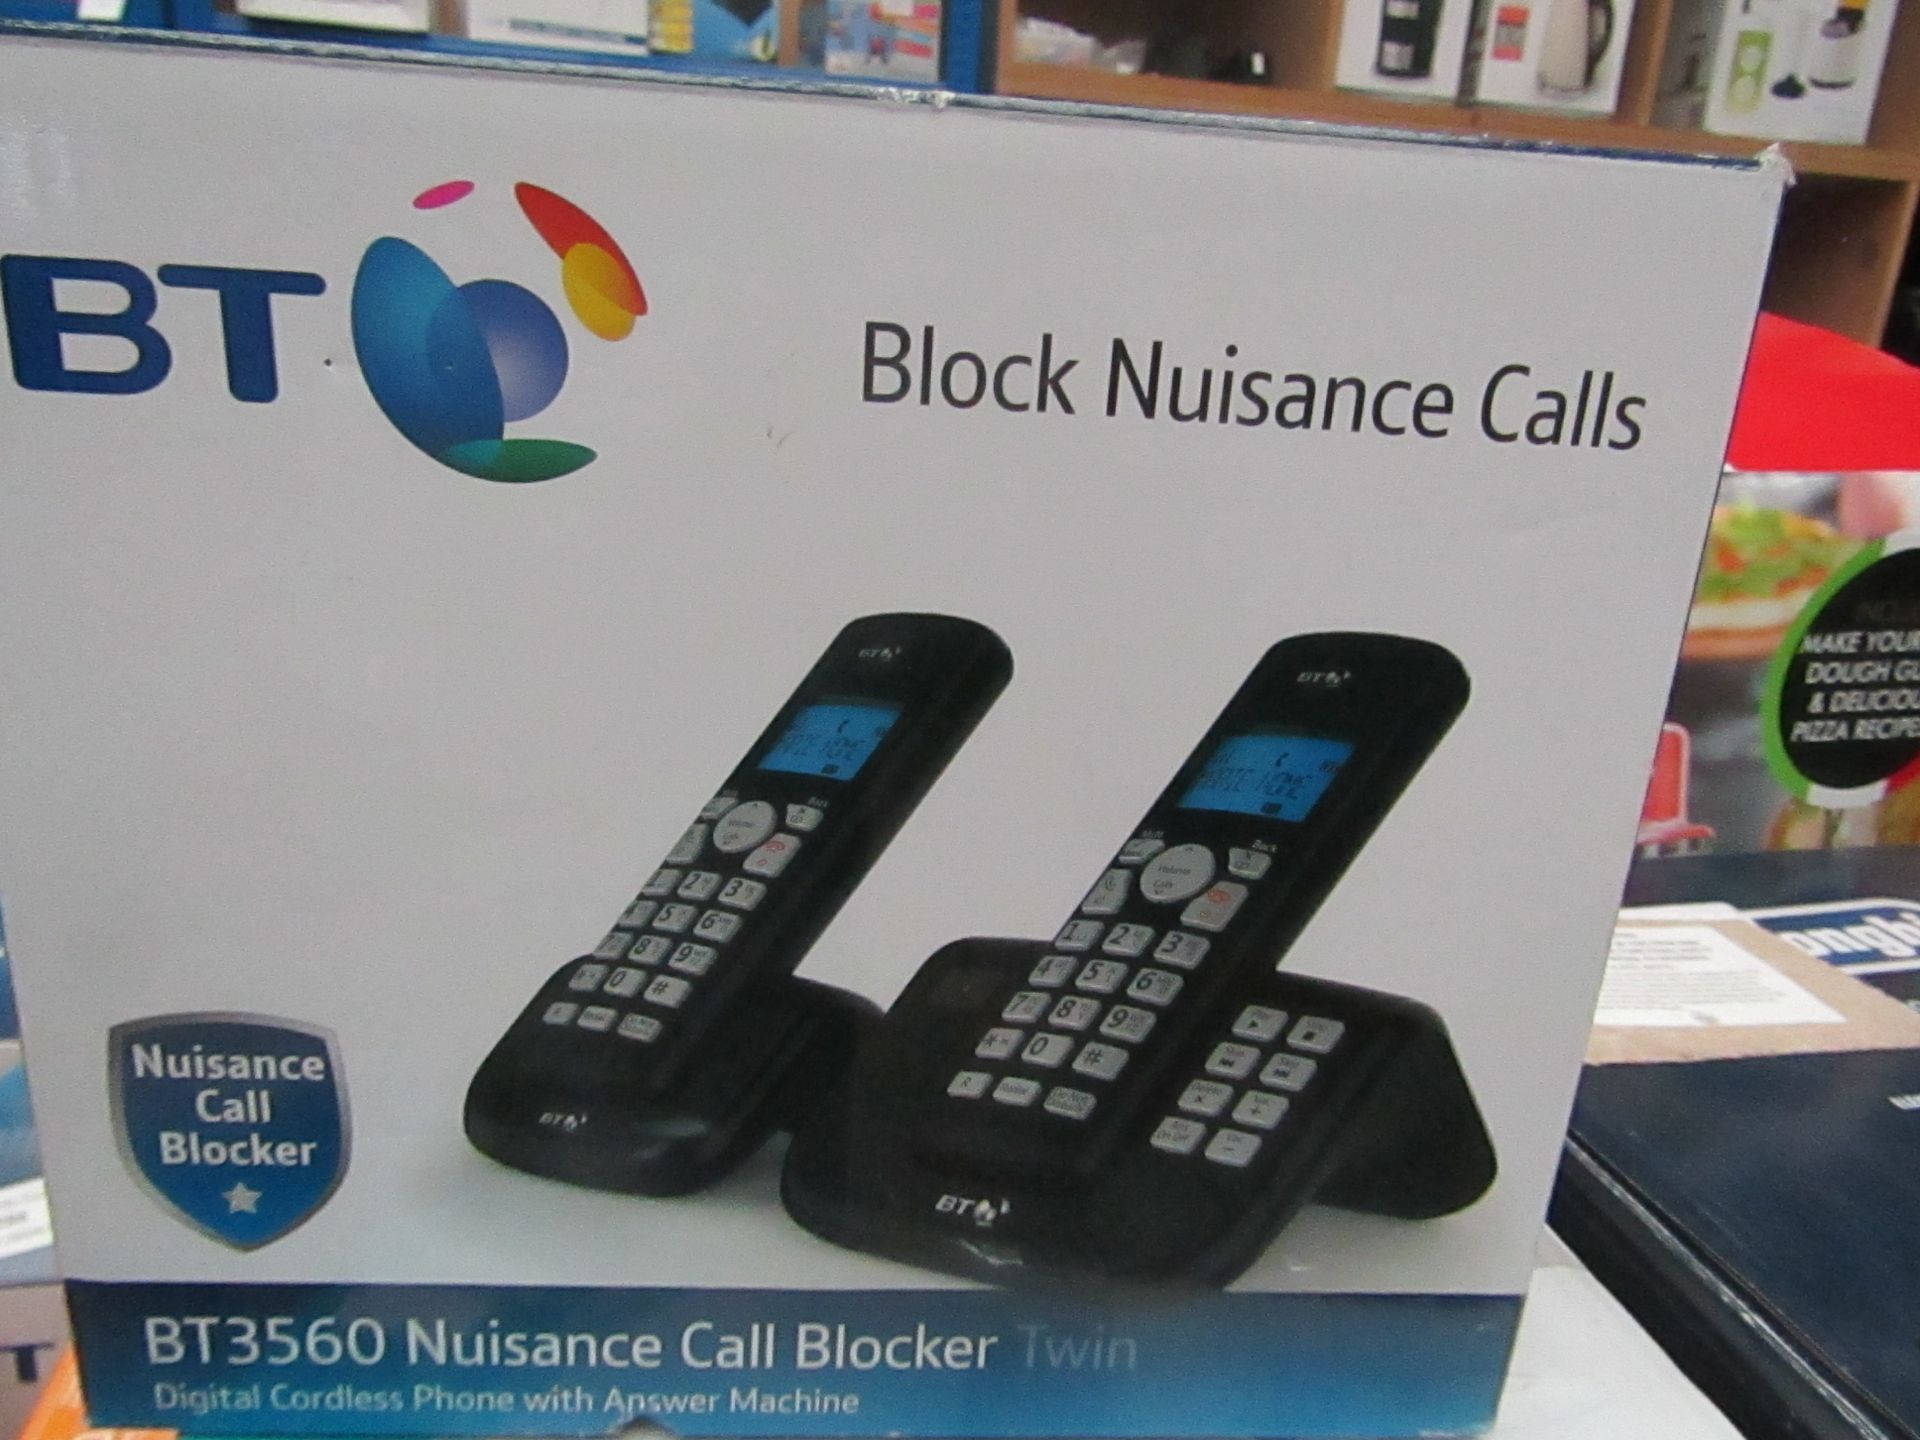 BT BT3560 nuisance call blocker twin digital cordless phone with answering machine, complete but